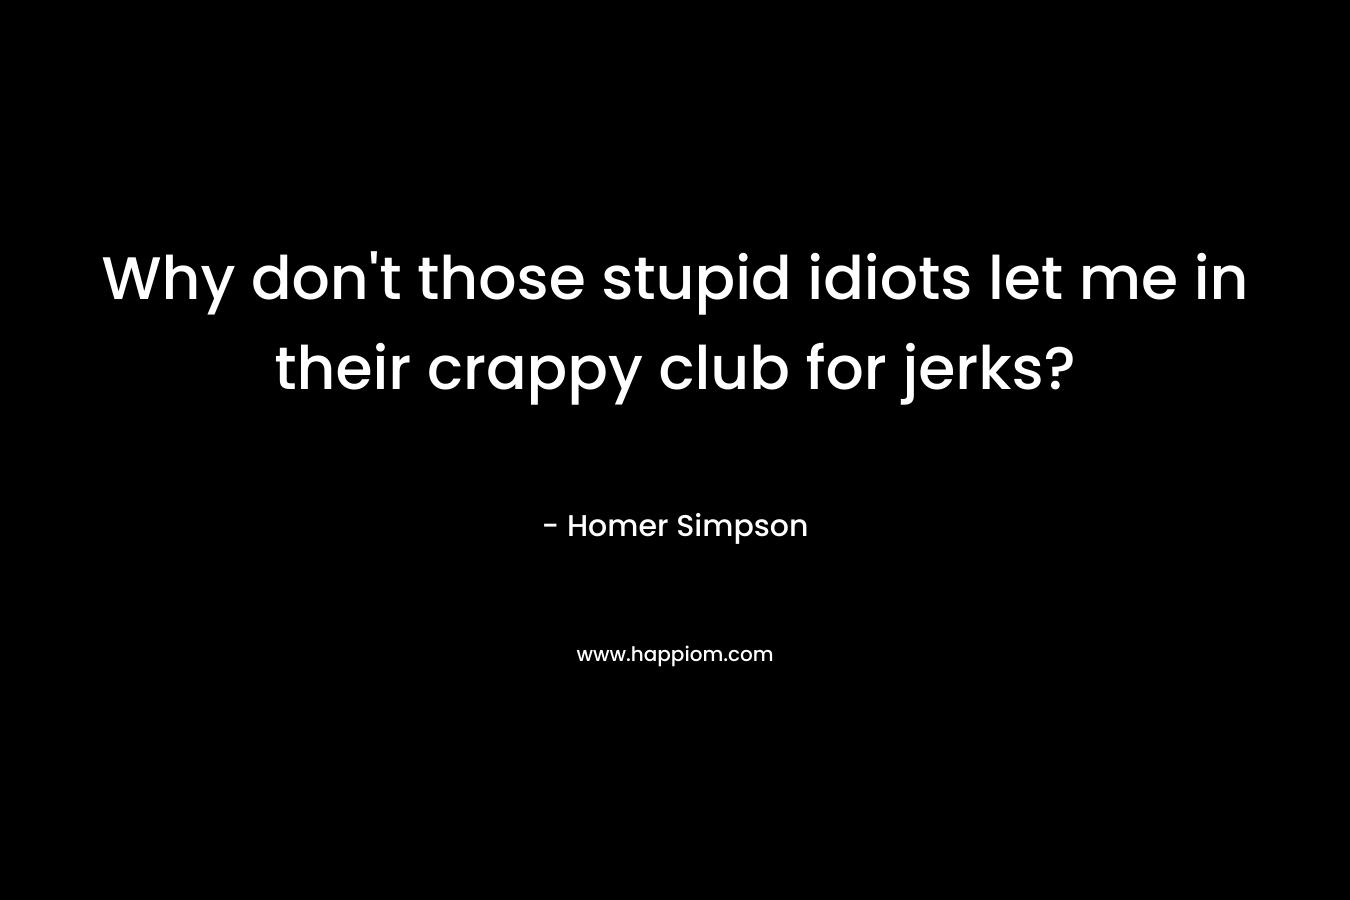 Why don’t those stupid idiots let me in their crappy club for jerks? – Homer Simpson